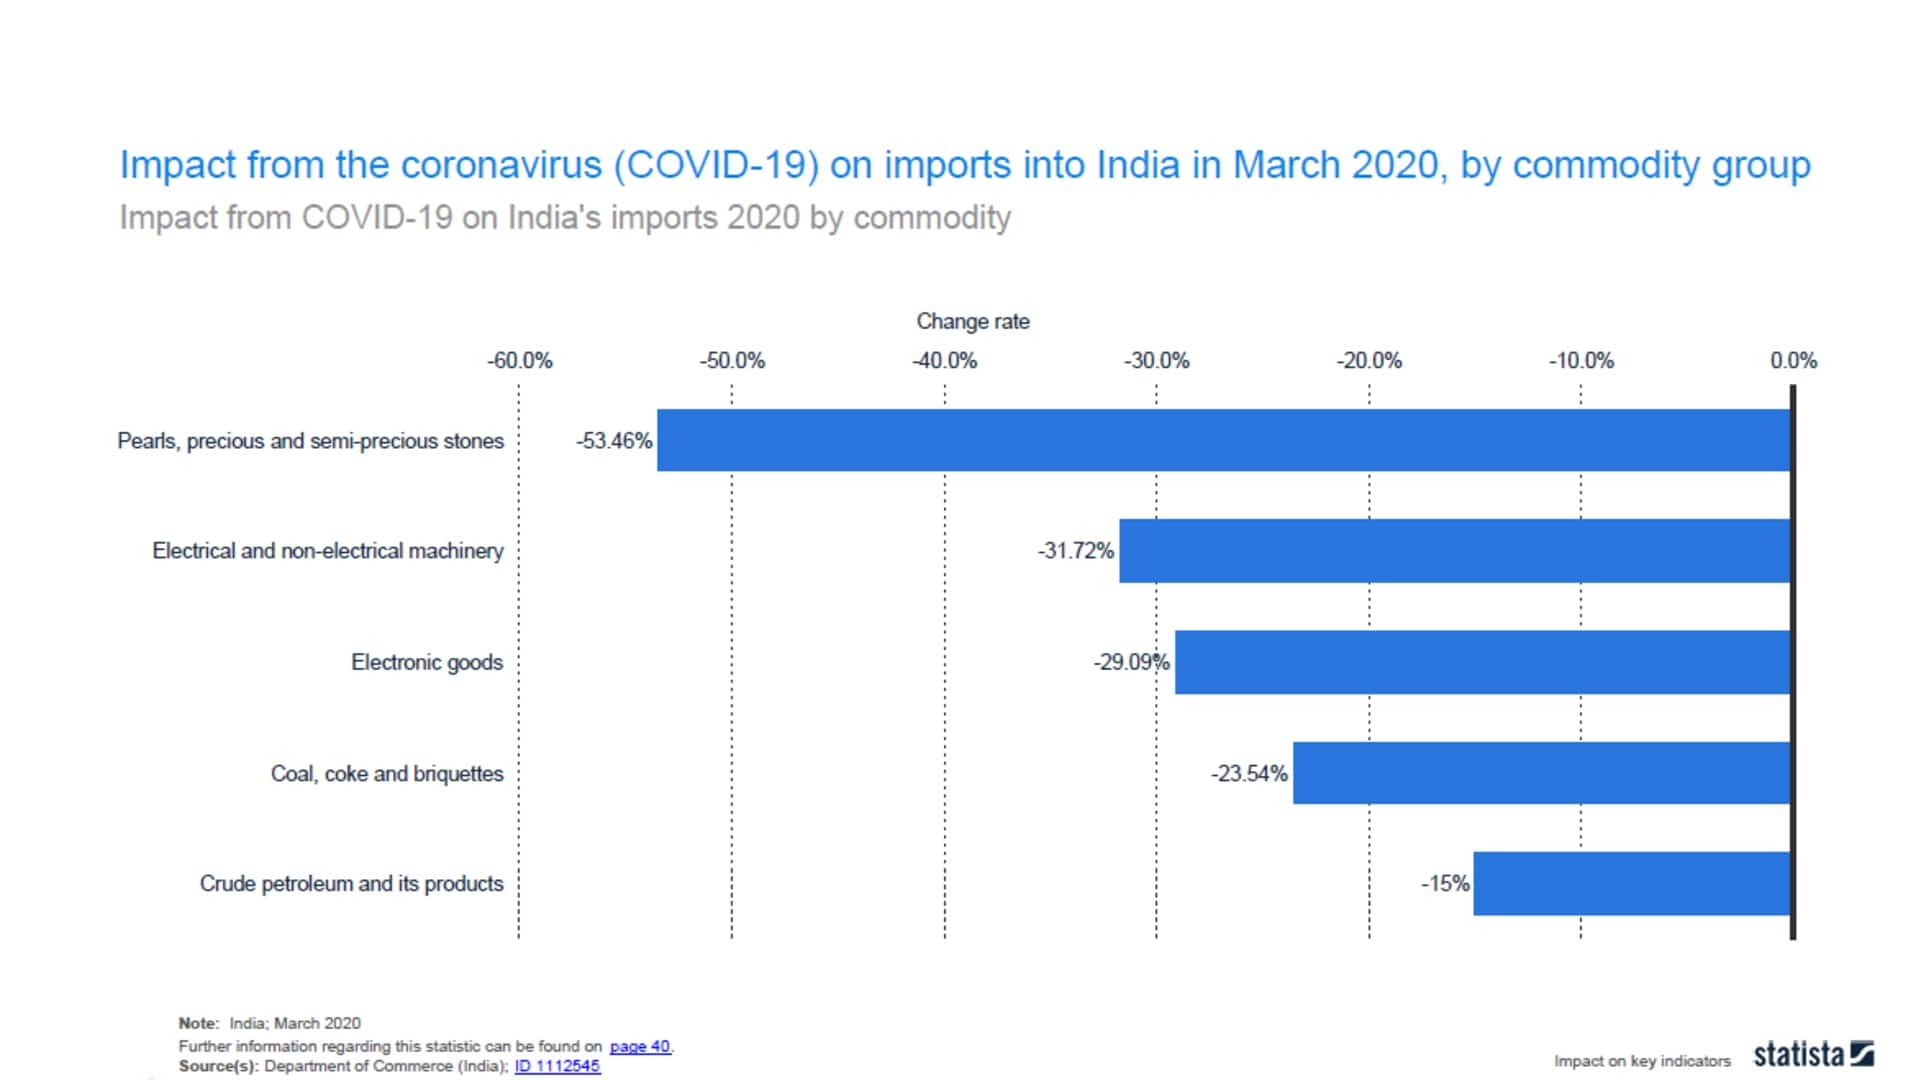 Impact from the coronavirus (COVID-19) on imports into India in March 2020, by commodity group: Crude petroleum and its products into India was the least affected amongst commodities in the country's import market with a decline of 15 percent in March 2020, compared to the same month in the previous year. Pearls, precious and semi-precious stones, electrical and non-electrical machinery and electronic goods took the steepest hit ranging between losses of 30 and 53 percent that month. The country went into lockdown on March 25, 2020, the largest in the world, restricting 1.3 billion people, extended until May 3, 2020. (Graph: CRISIL)